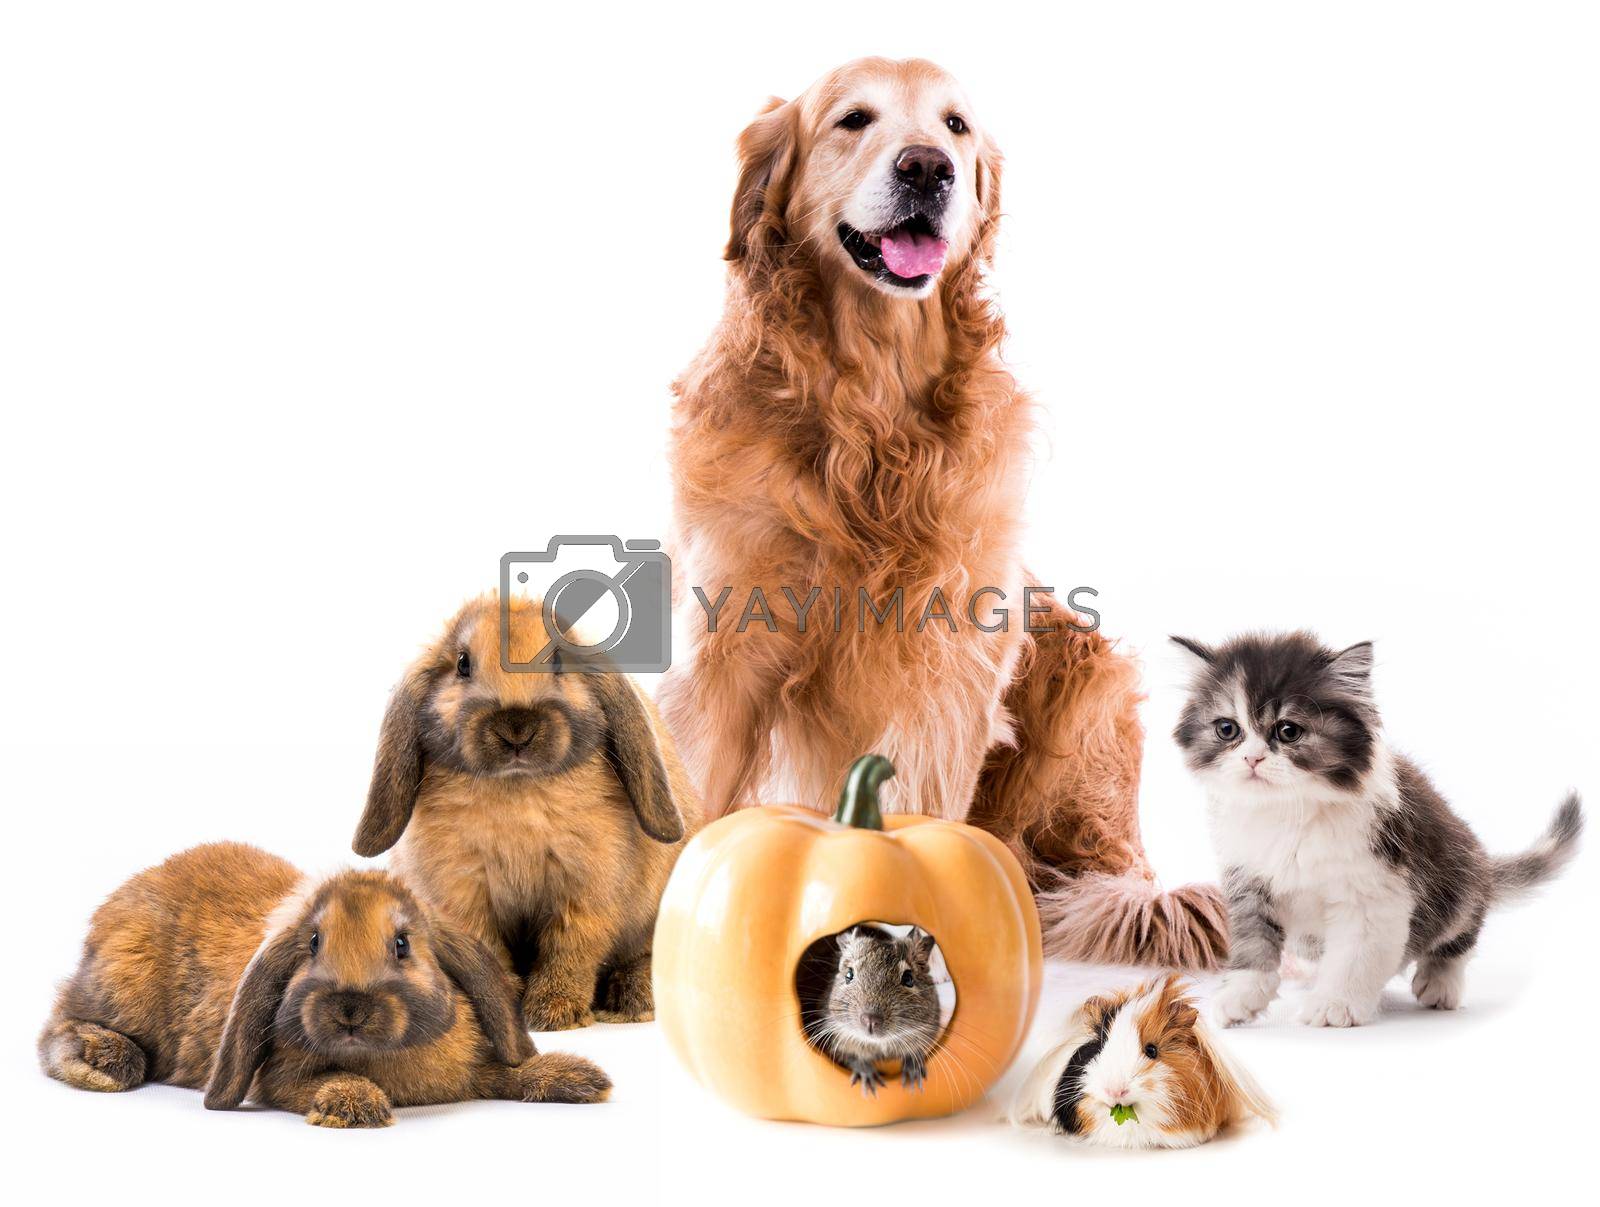 Royalty free image of Group of cute fluffy pets by tan4ikk1